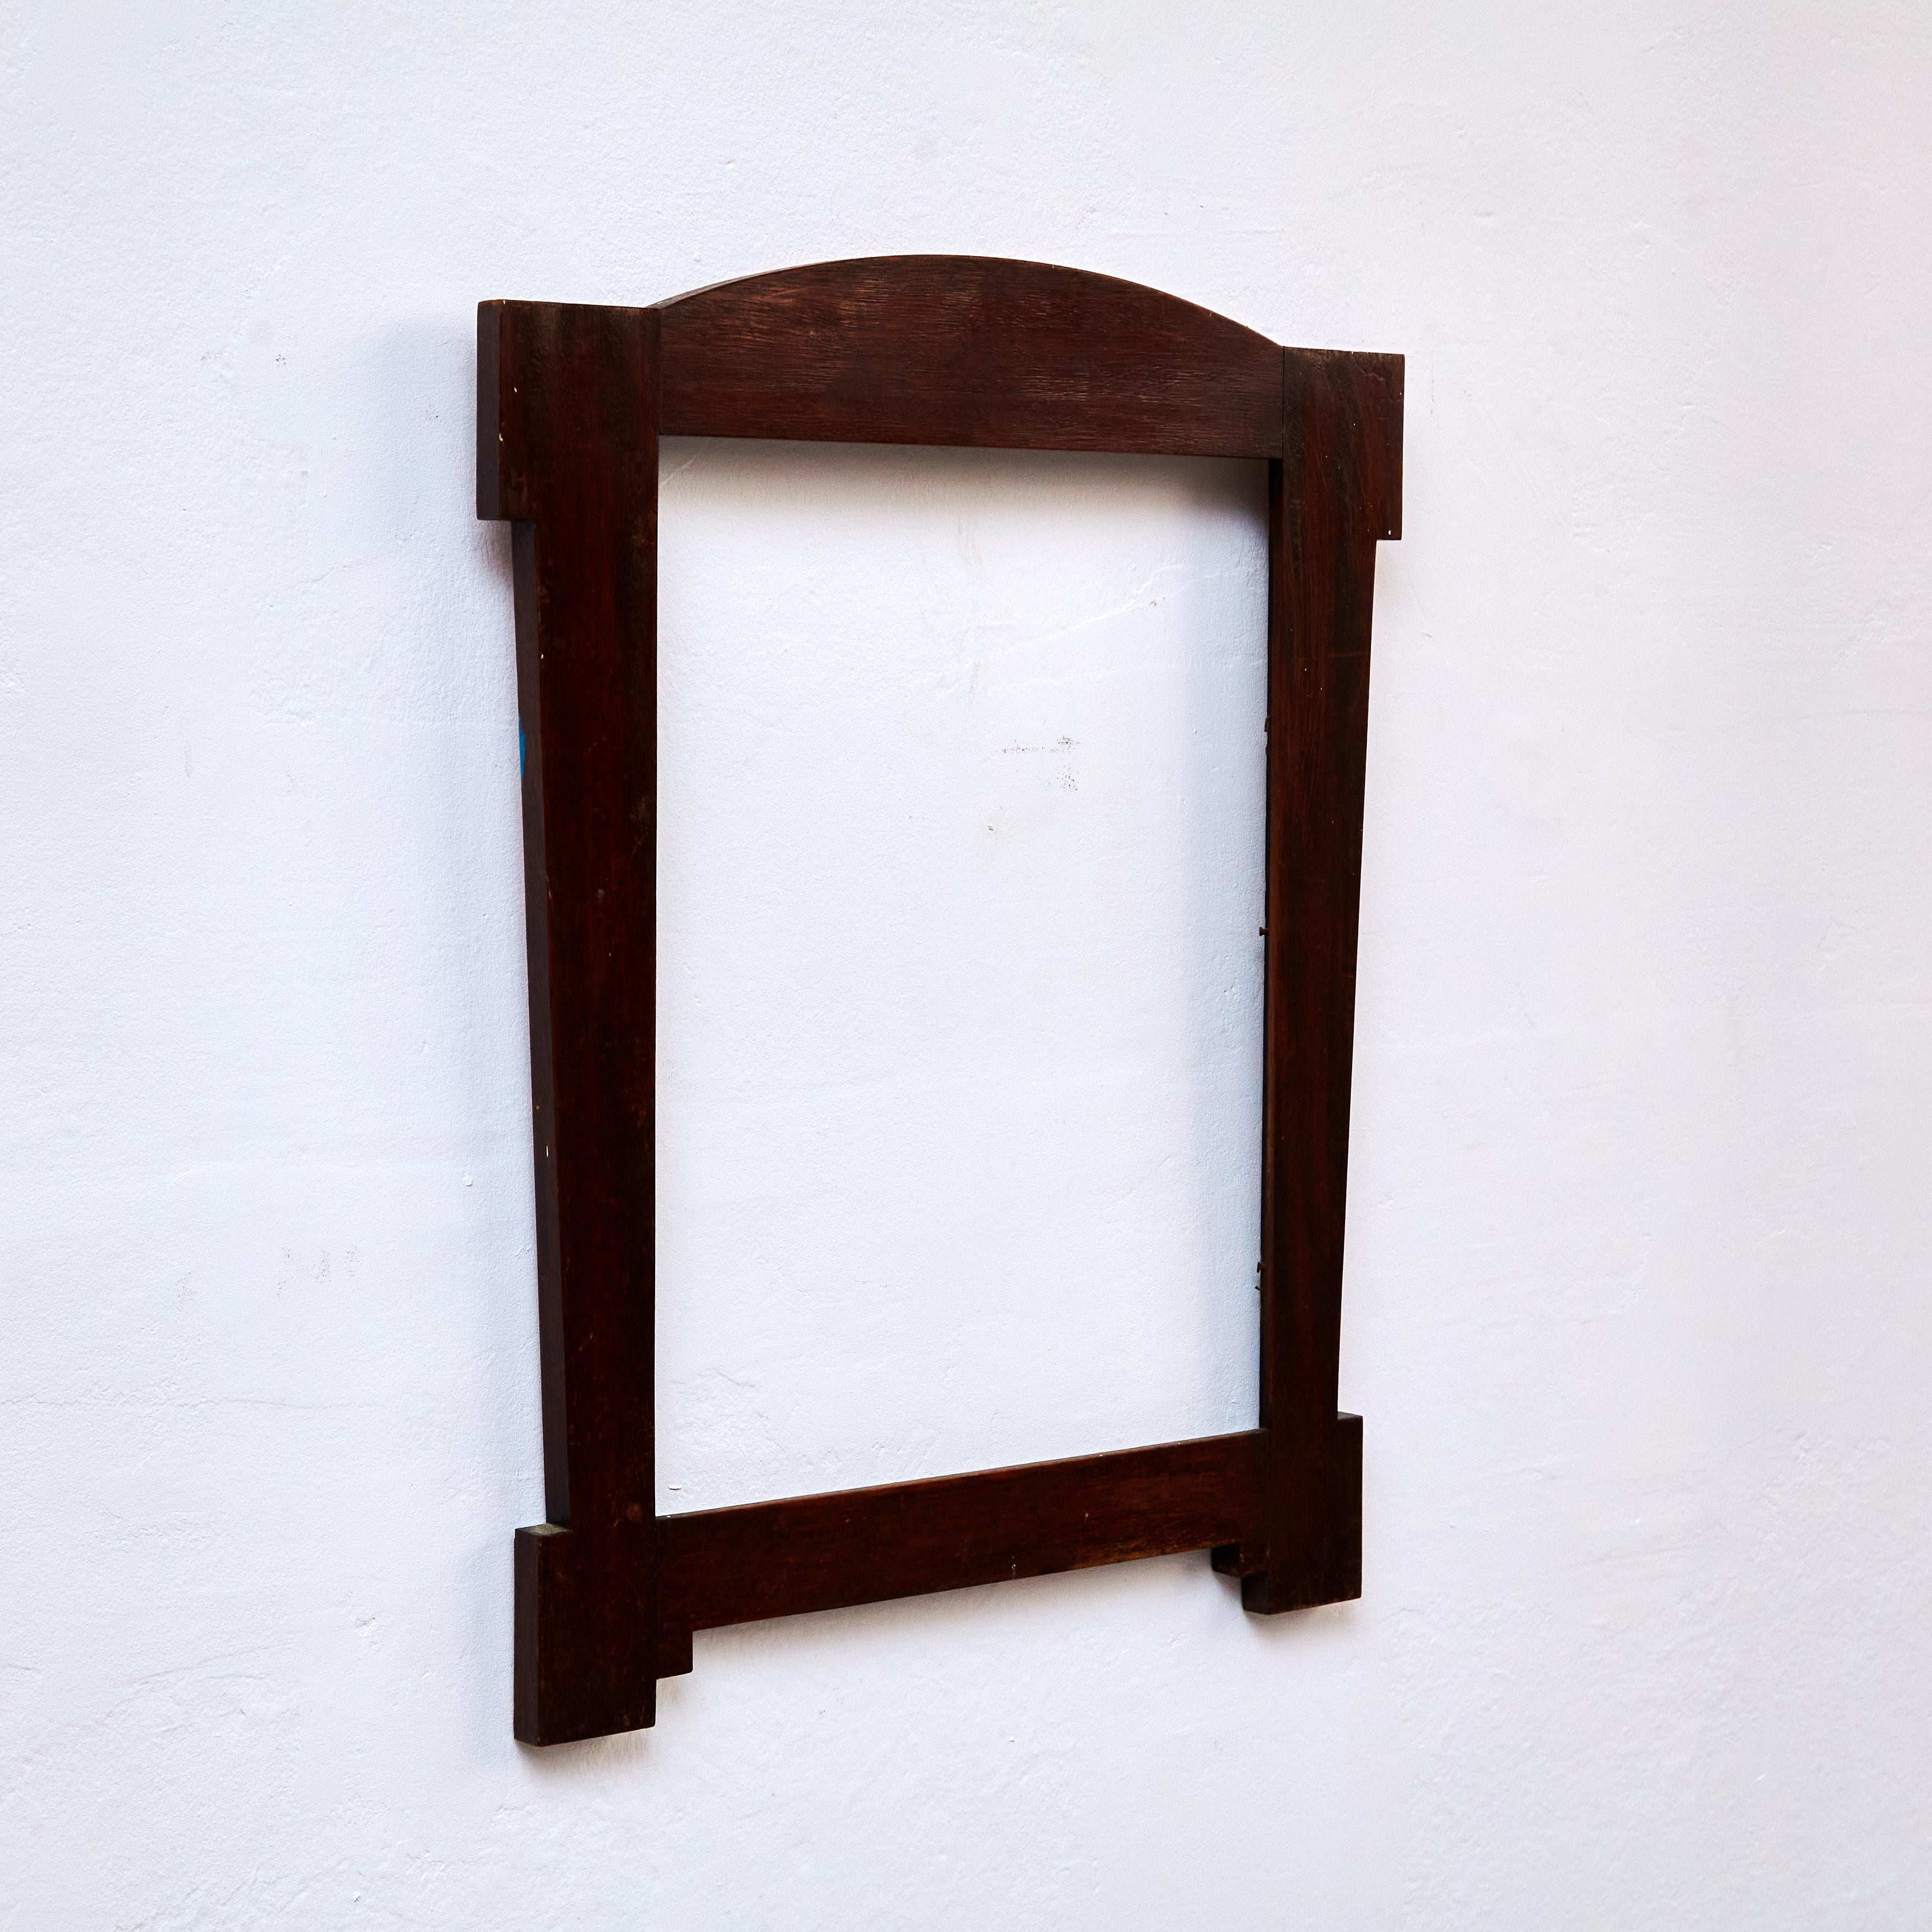 Early 20th century modern wood frame.

Manufactured in France, circa 1940.

In original condition with minor wear consistent of age and use, preserving a beautiful patina.

Materials: 
Wood 

Dimensions: 
D 2.5 cm x W 38 cm x H 72